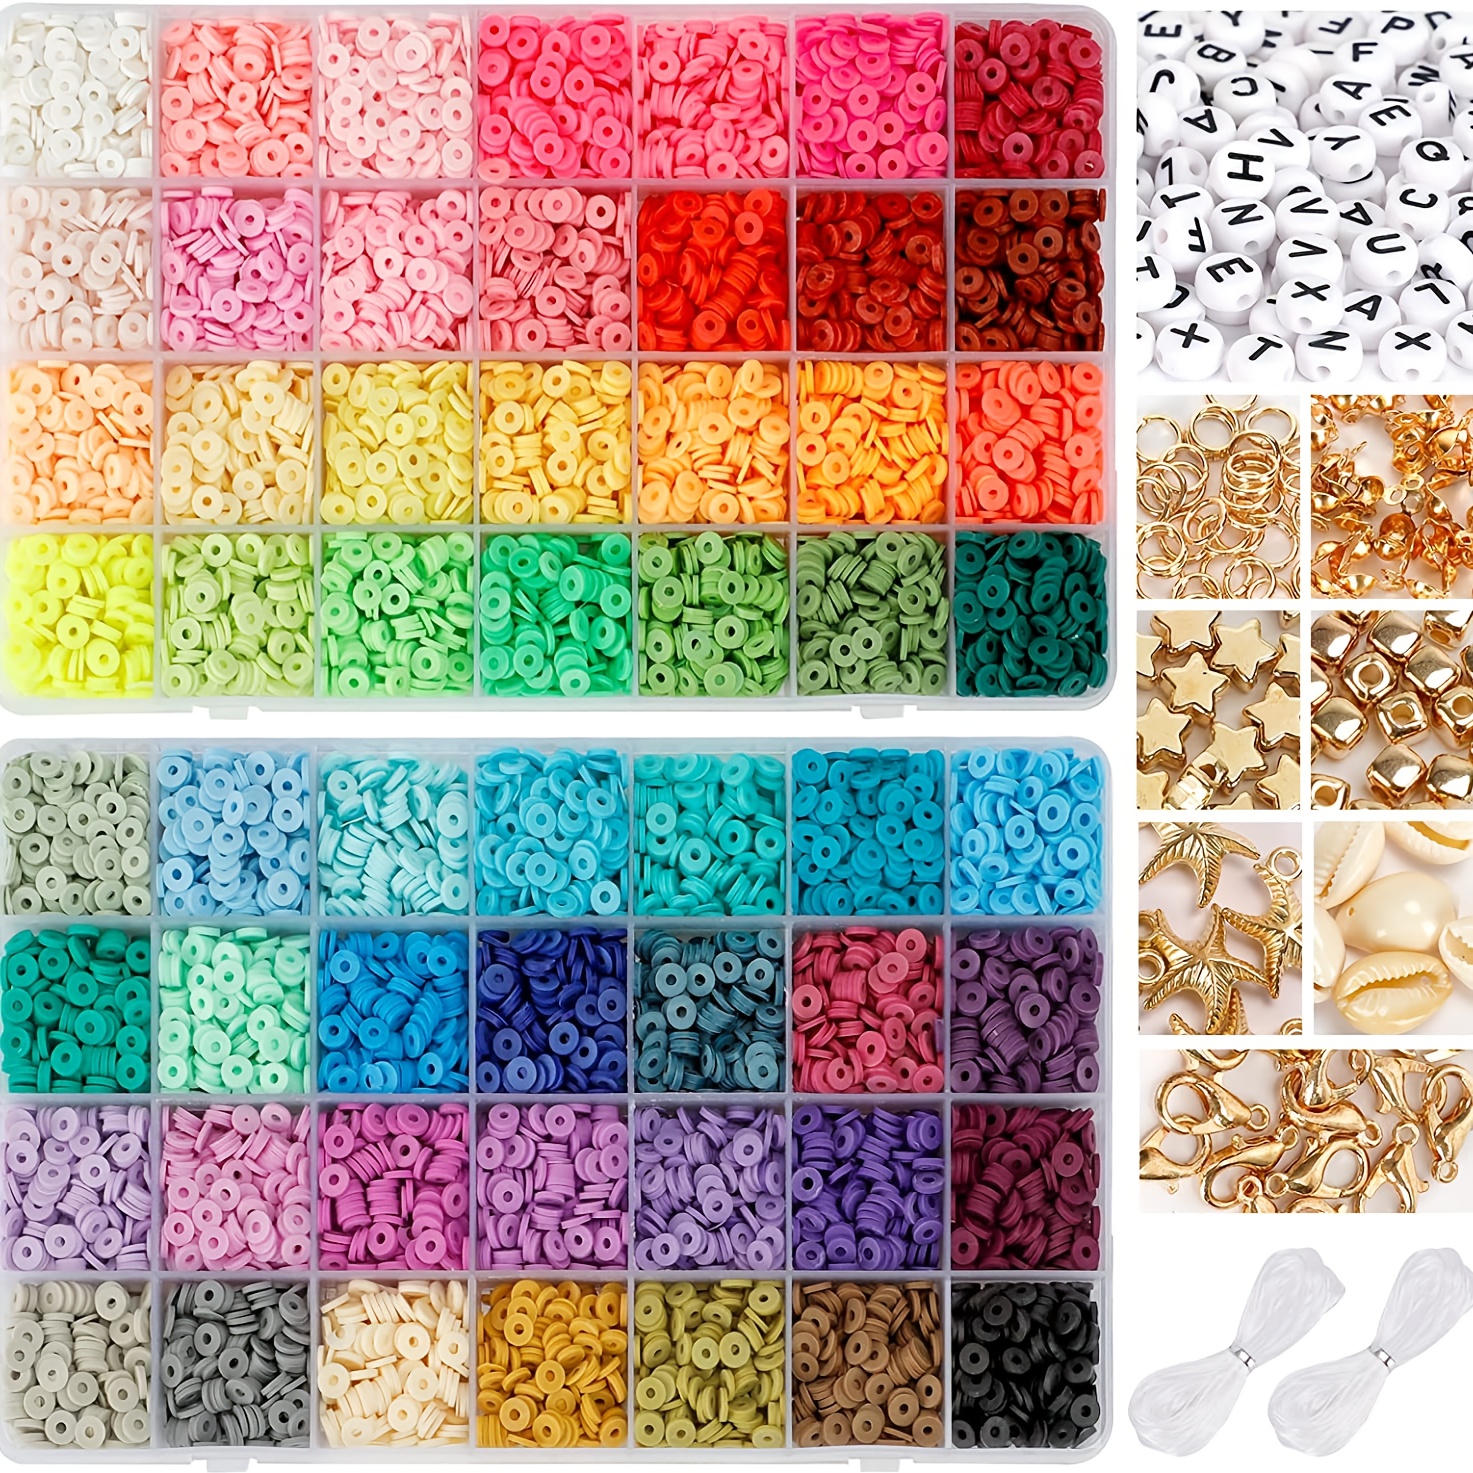 Goody King Jewelry Making Kit Beads for Bracelets - 5000+pcs Bead Craft Kit  Set, Glass Pony Seed Letter Alphabet DIY Art and Craft - Gift for Her